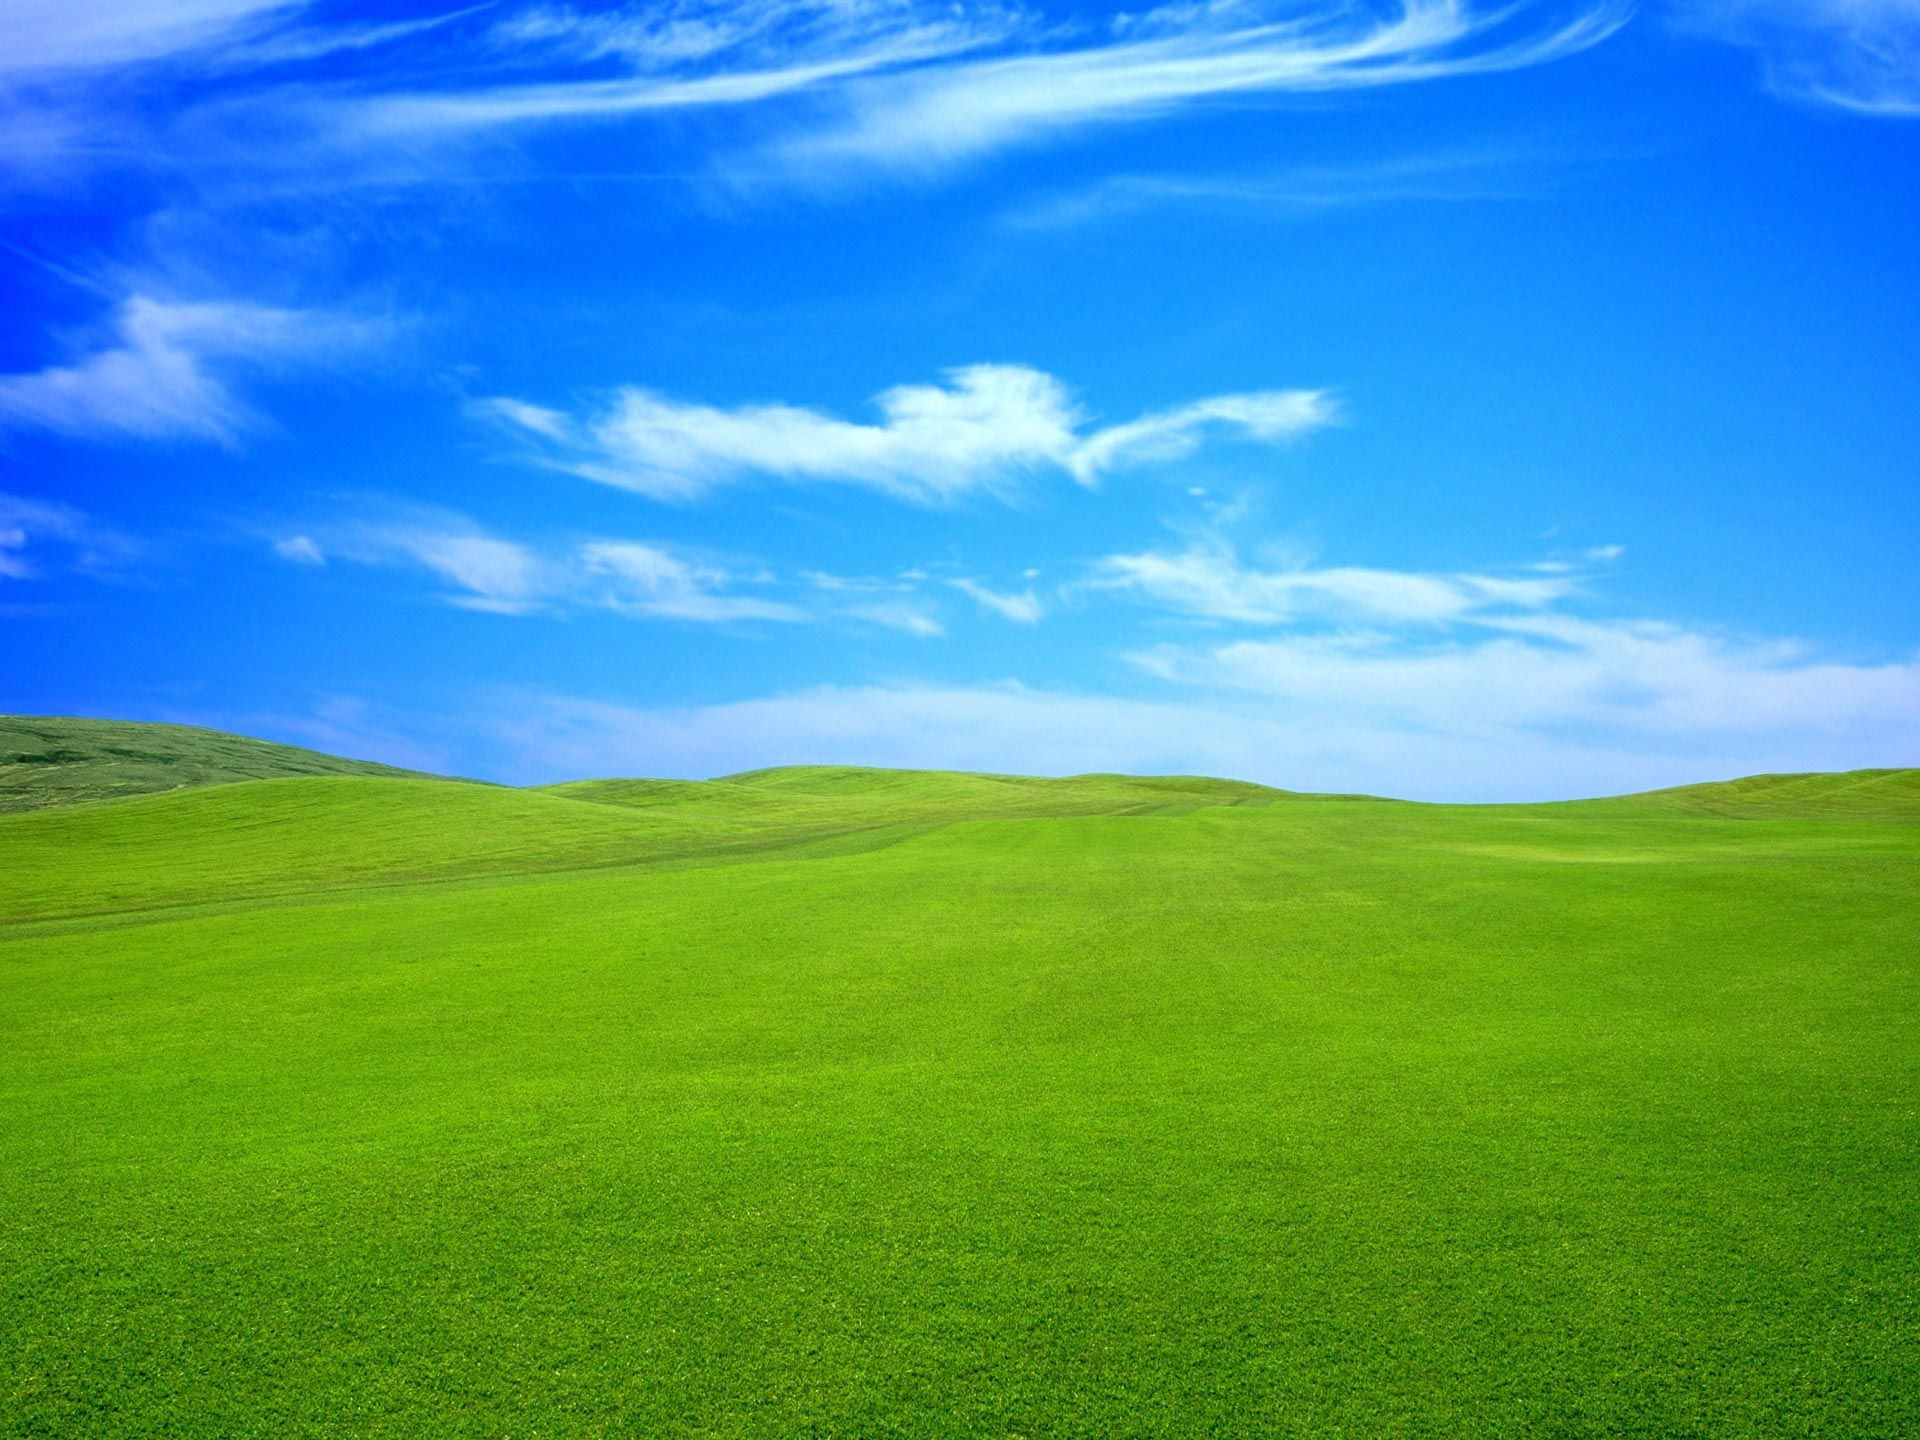 Grass and Sky: Spring, Plain, Meadow, Prairie, Heathland, Steppe, Parkland, Countryside, Wool-pack clouds. 1920x1440 HD Wallpaper.